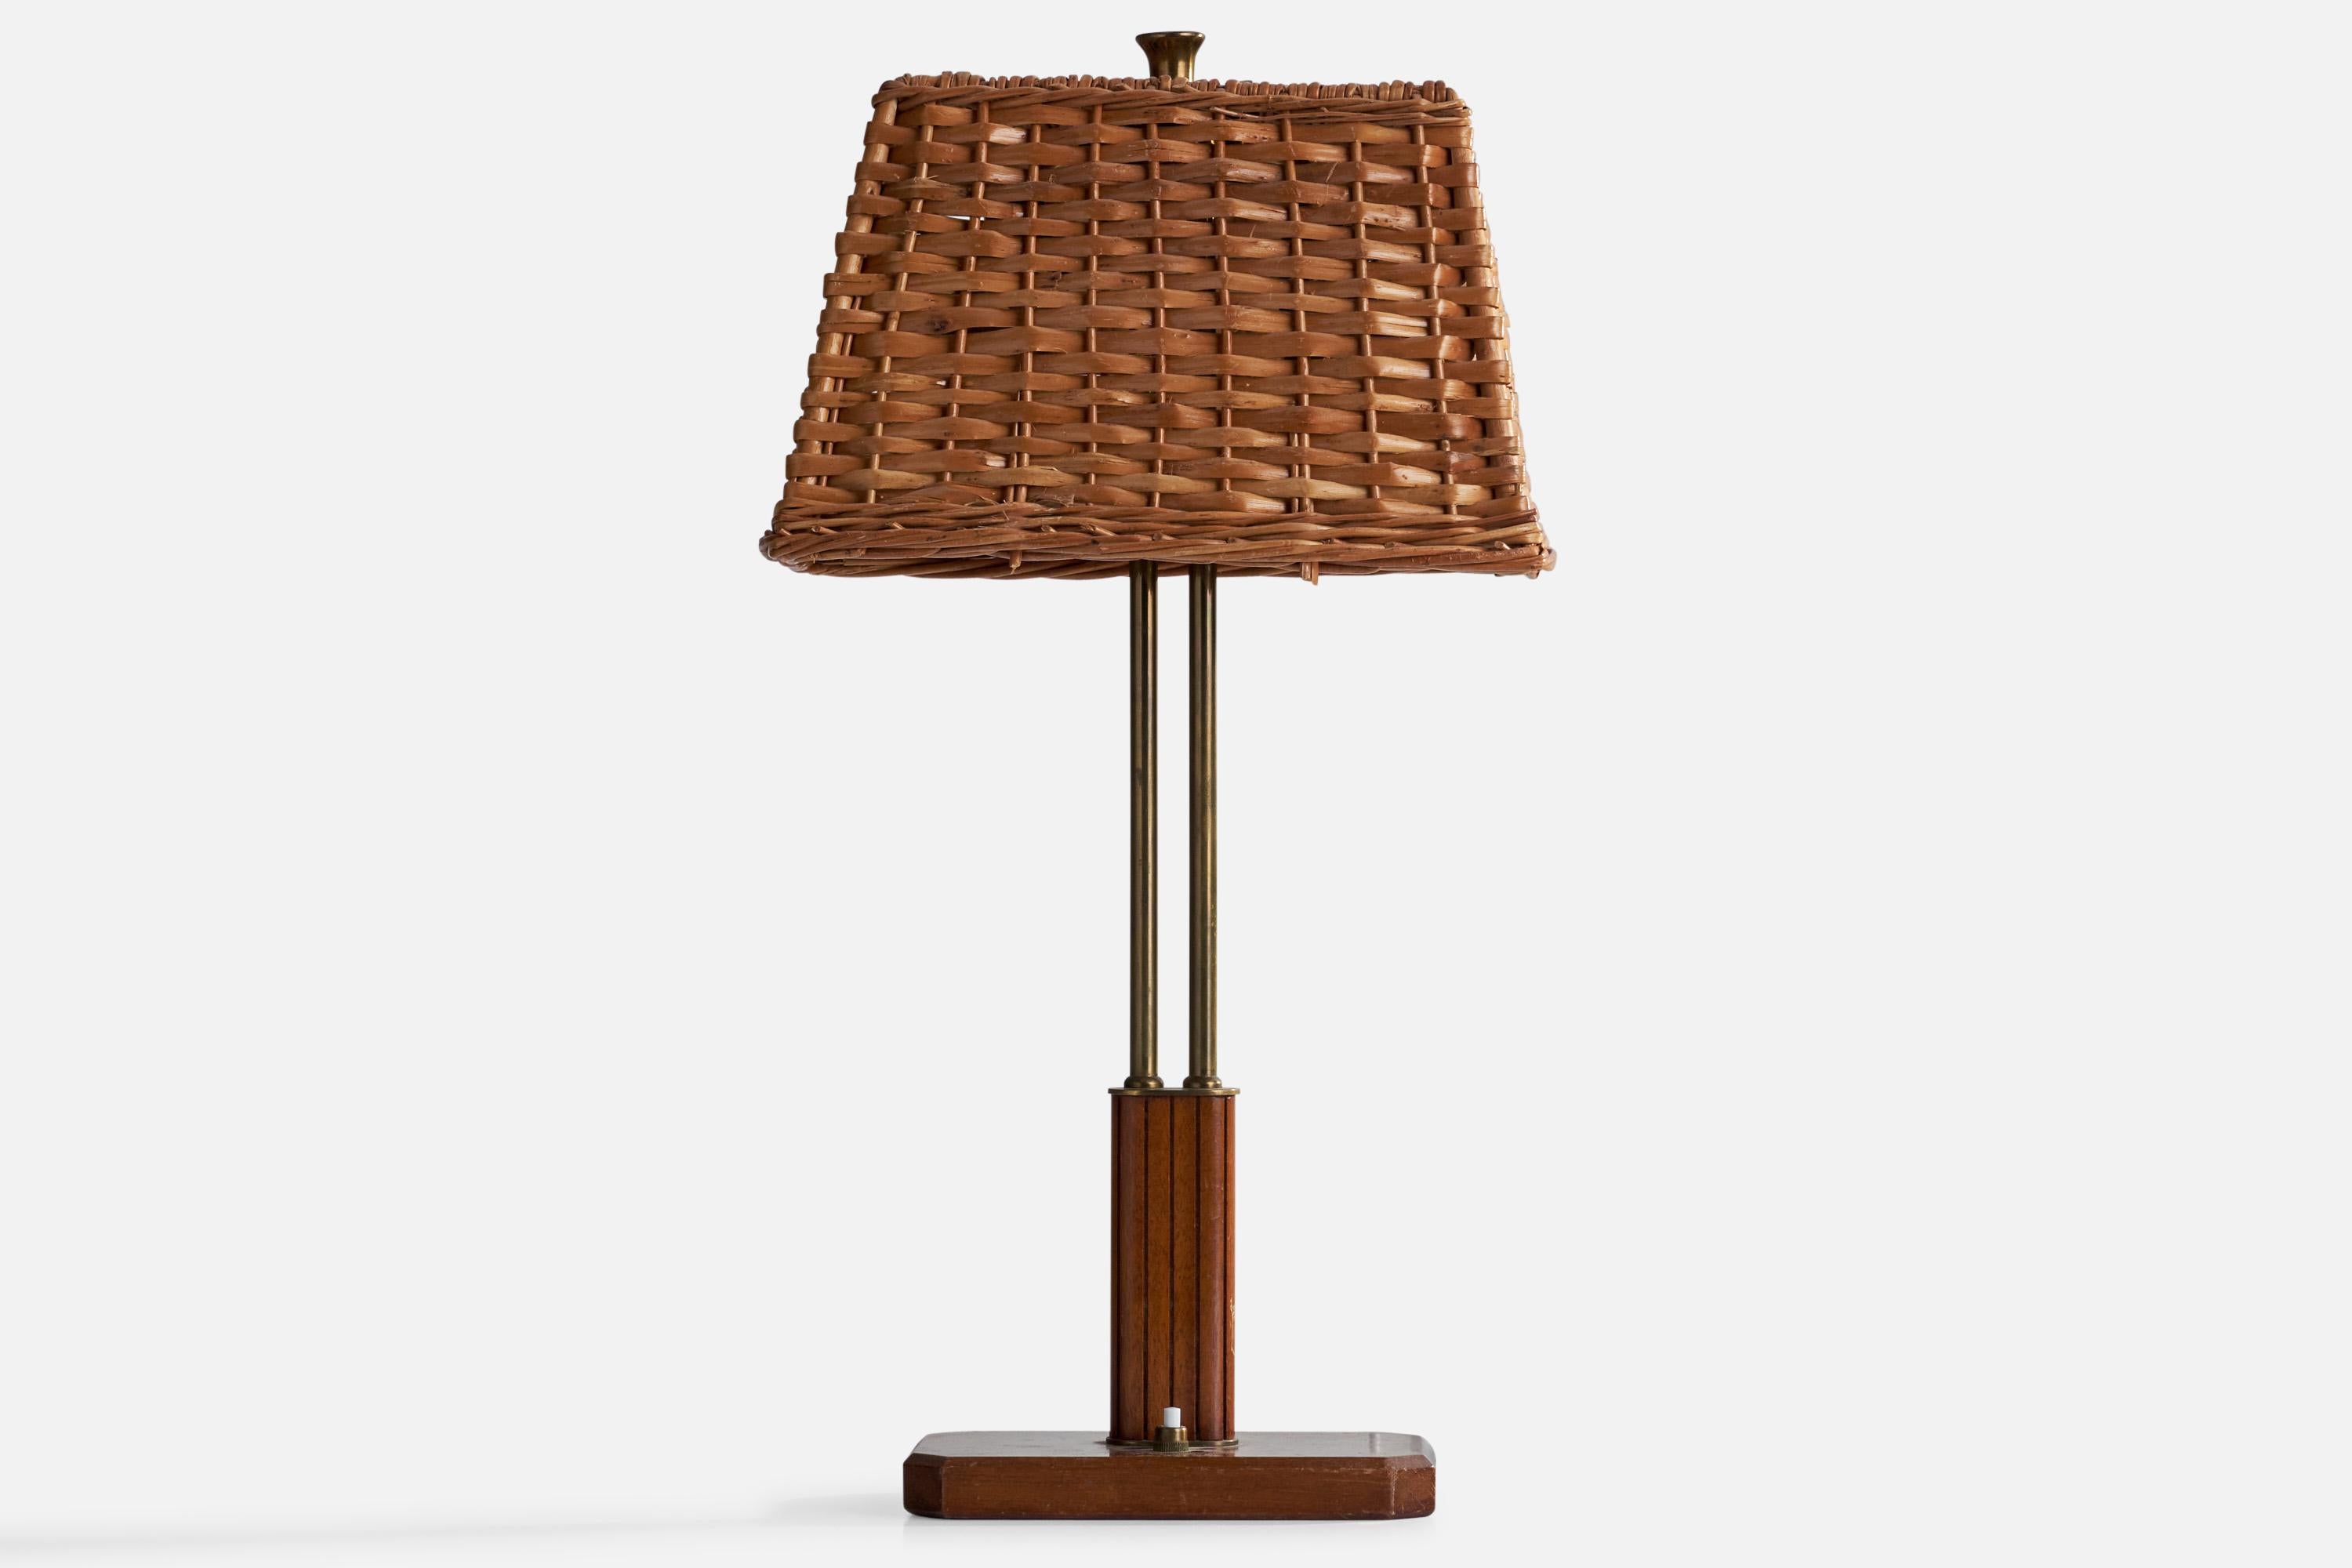 A rare brass, mahogany and rattan table lamp designed by Harald Notini and produced by Böhlmarks, Sweden, 1940s.

Overall Dimensions (inches): 19”  H x 10” W x 6.5” D
Stated dimensions include shade.
Bulb Specifications: E-26 Bulb
Number of Sockets: